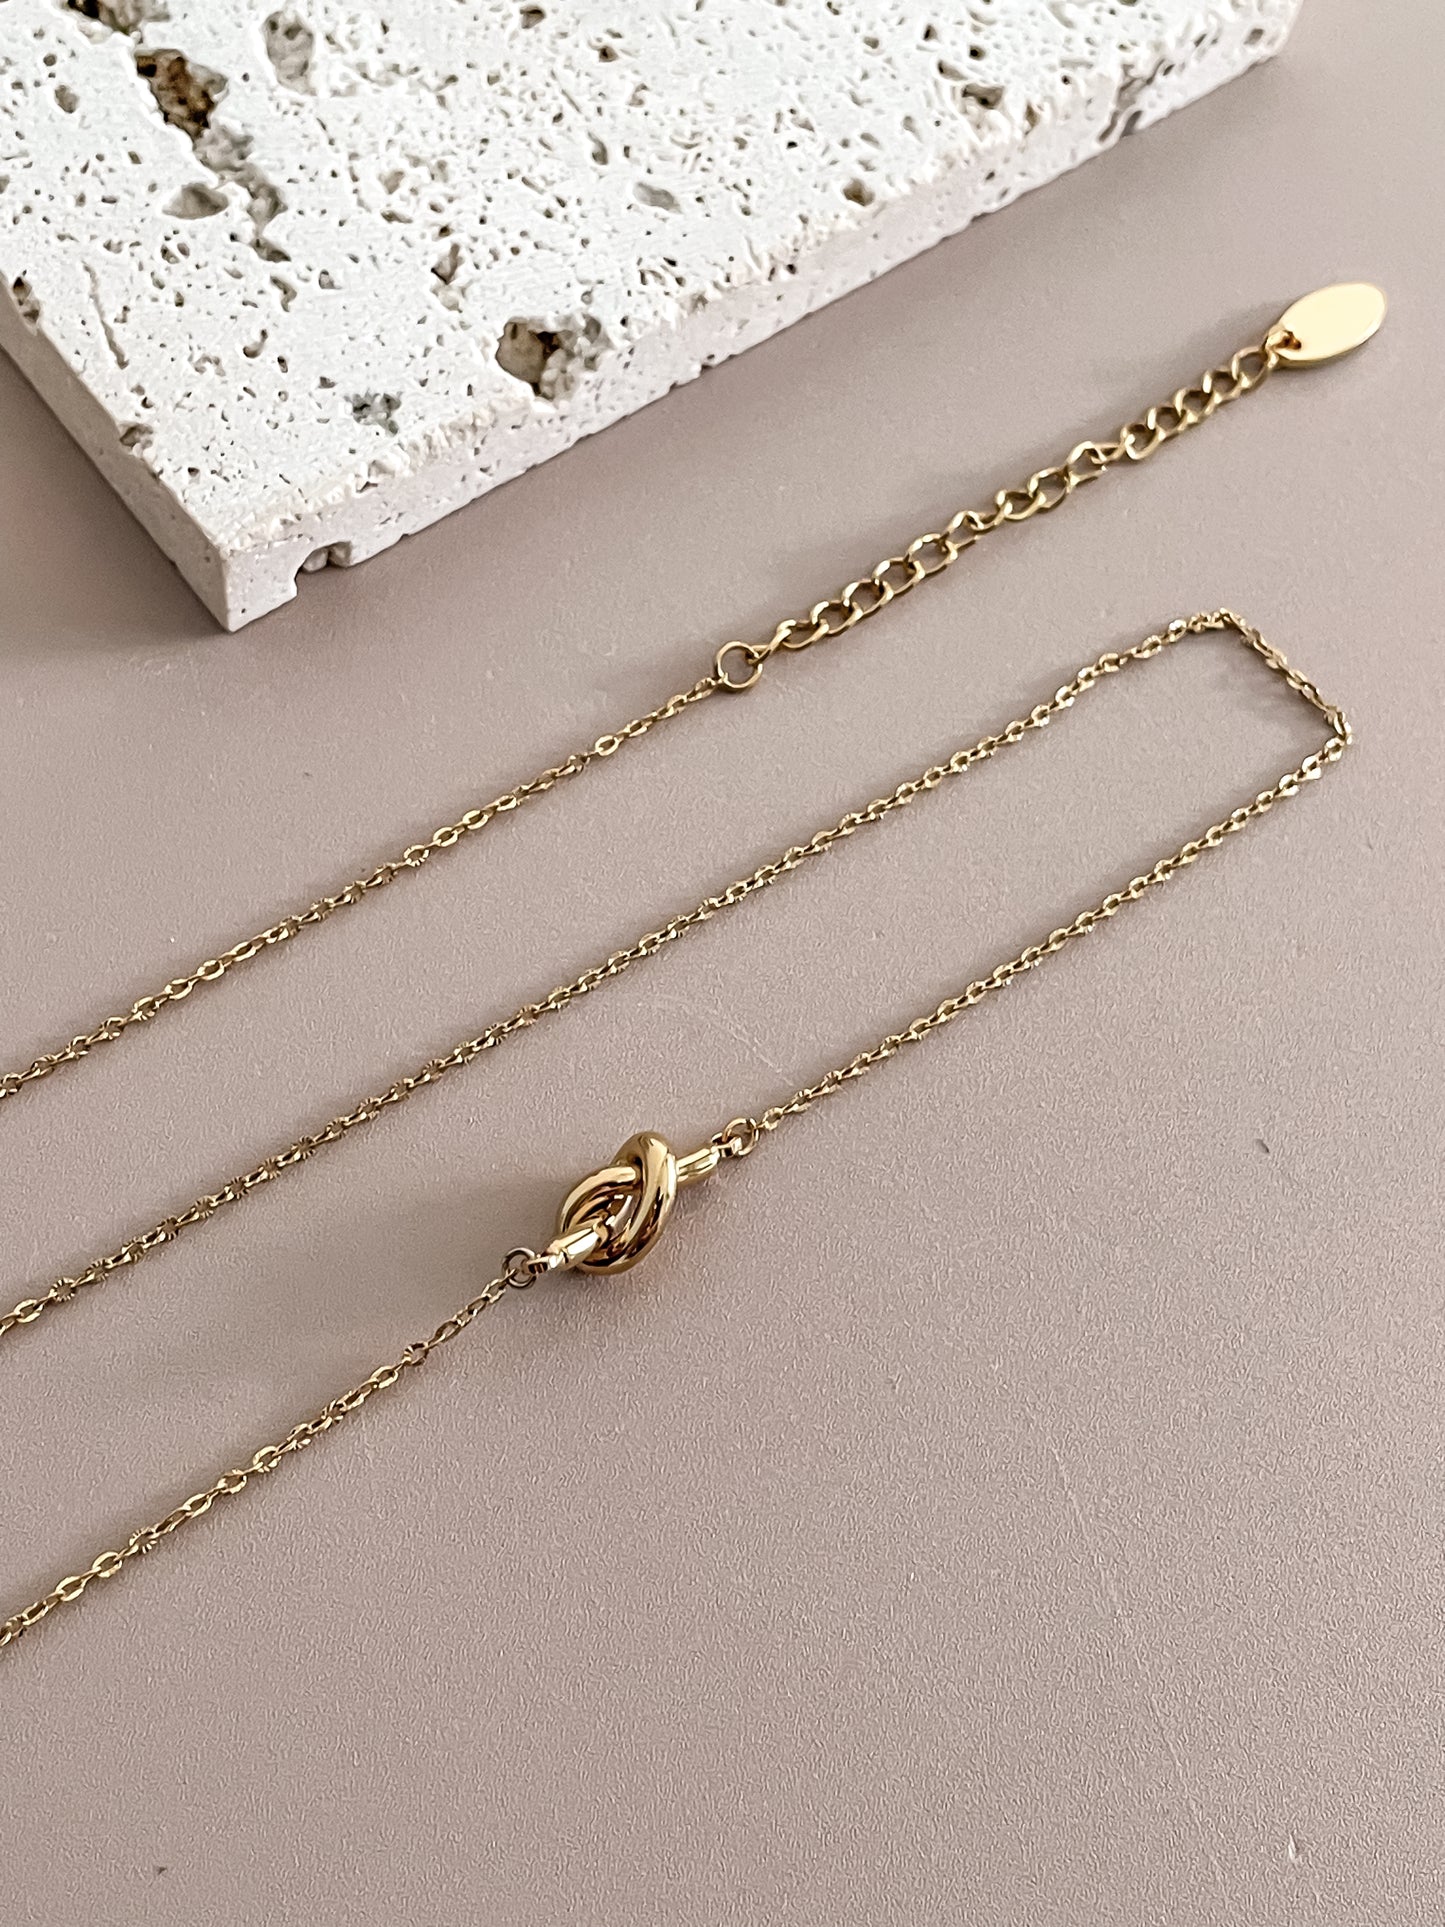 Gold Knot Necklace